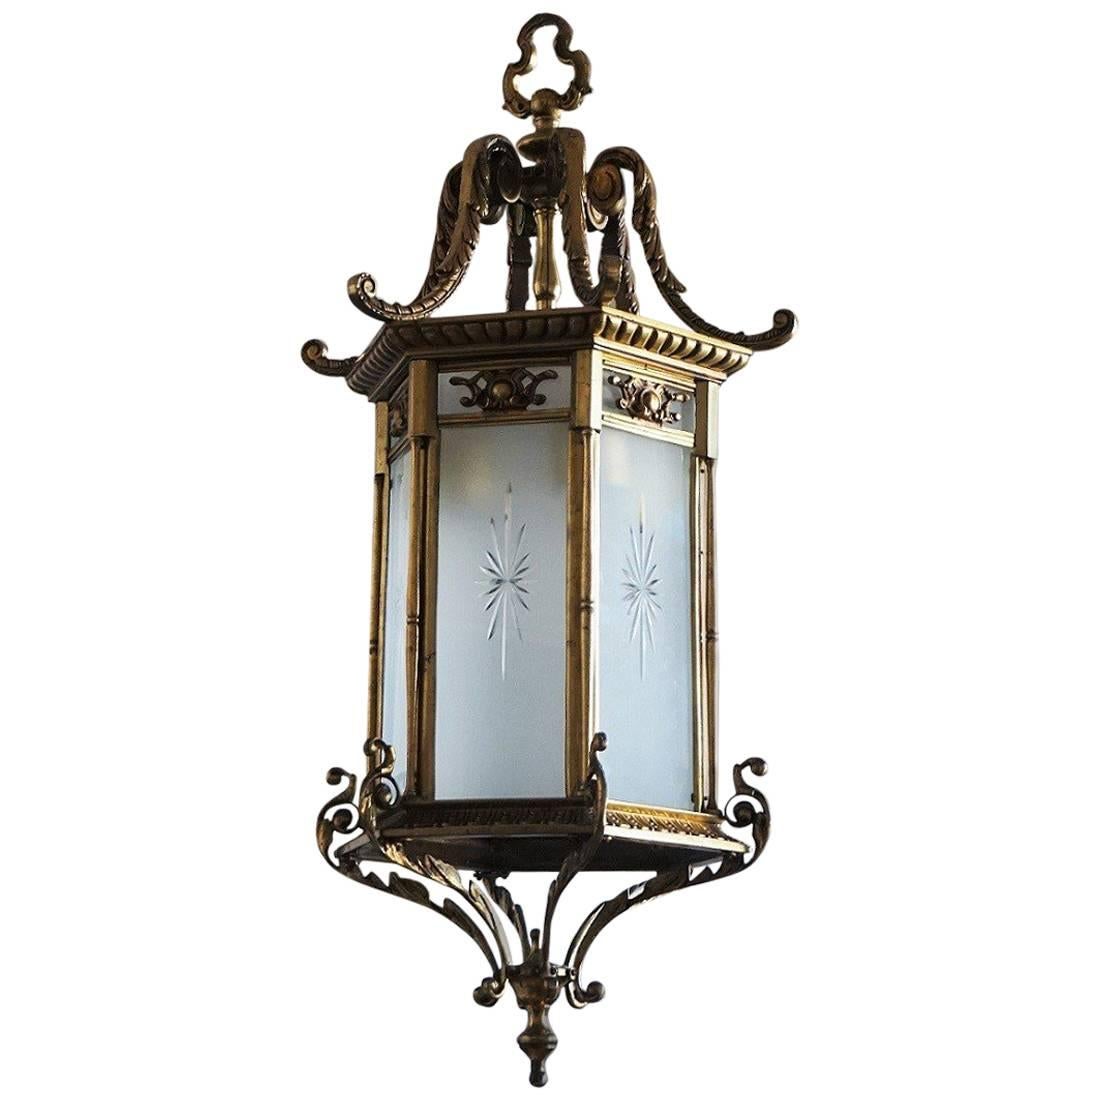 Heavy, large Regency style lantern, France, circa 1870-1880. This lantern is of solid bronze and parcel brass with six frosted cut glass windows. The lantern arrives with beautiful solid bronze canopy and chain. 
Number of lights: Two E27 light